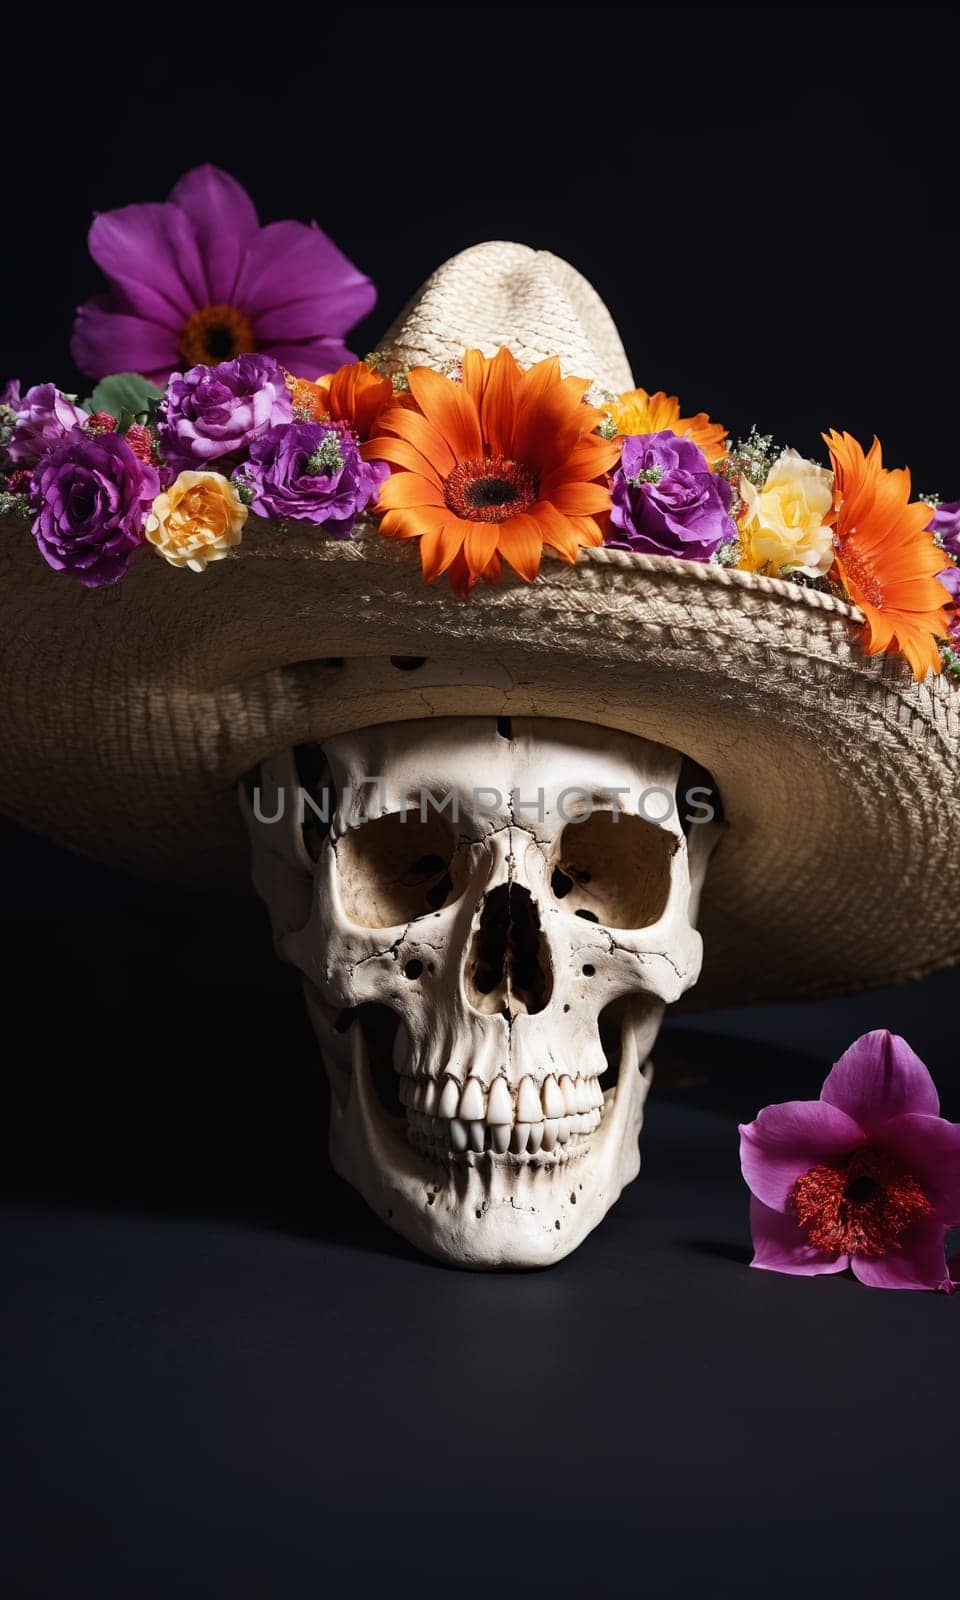 Skull with flowers and sombrero on a black background. by Andre1ns